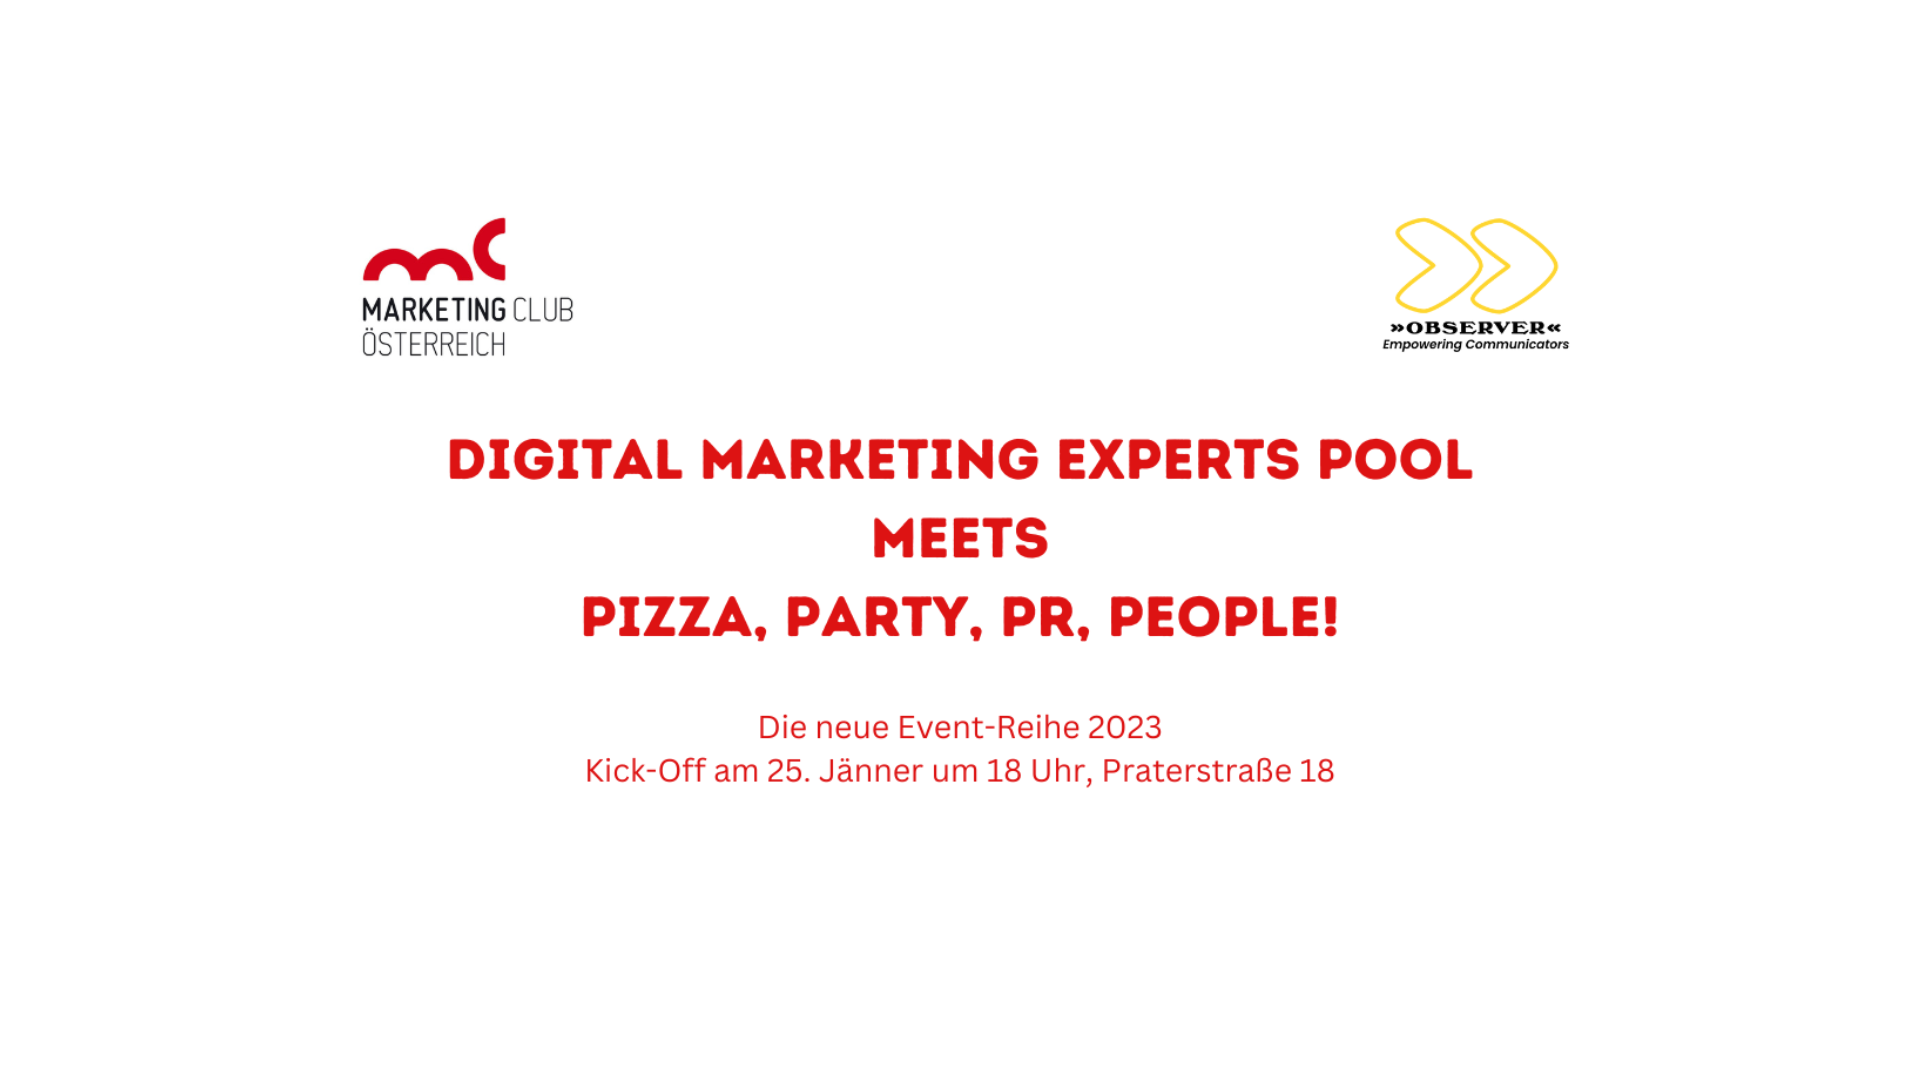 Pizza, Party, PR, People! meets Digital Marketing Experts Pool hosted by OBSERVER